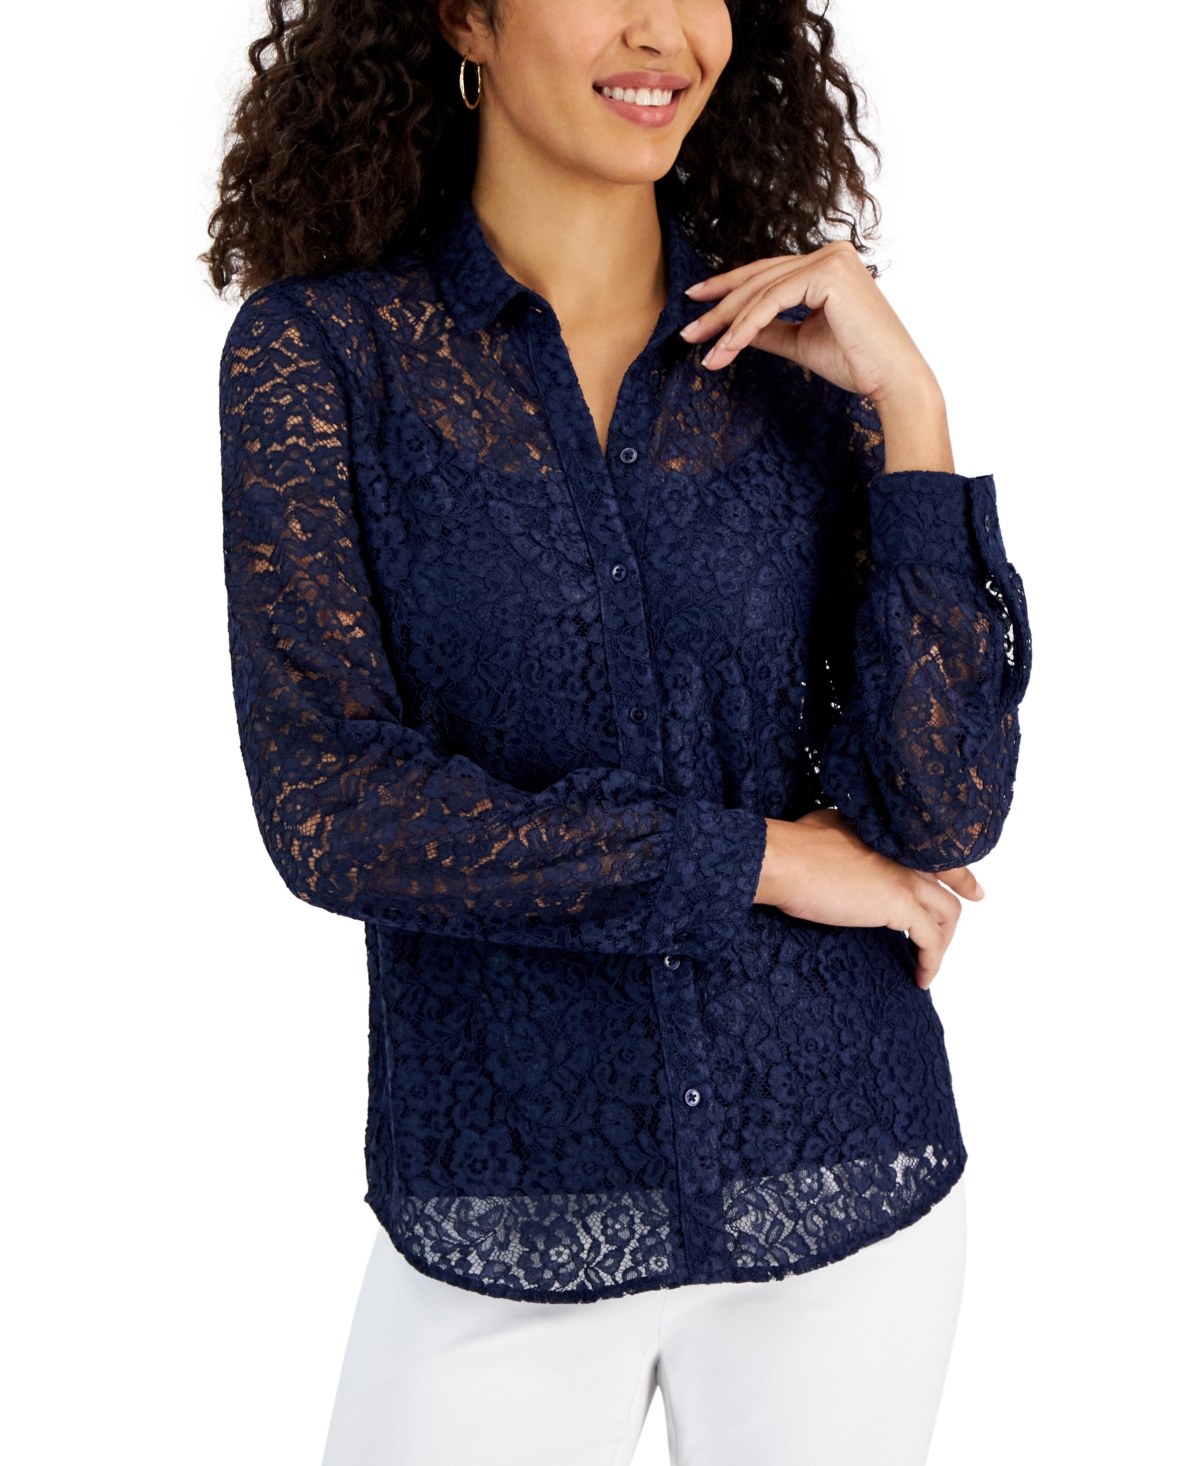 Women's Lace Button-Down Long-Sleeve Shirt, Created for Macy's - Intrepid Blue